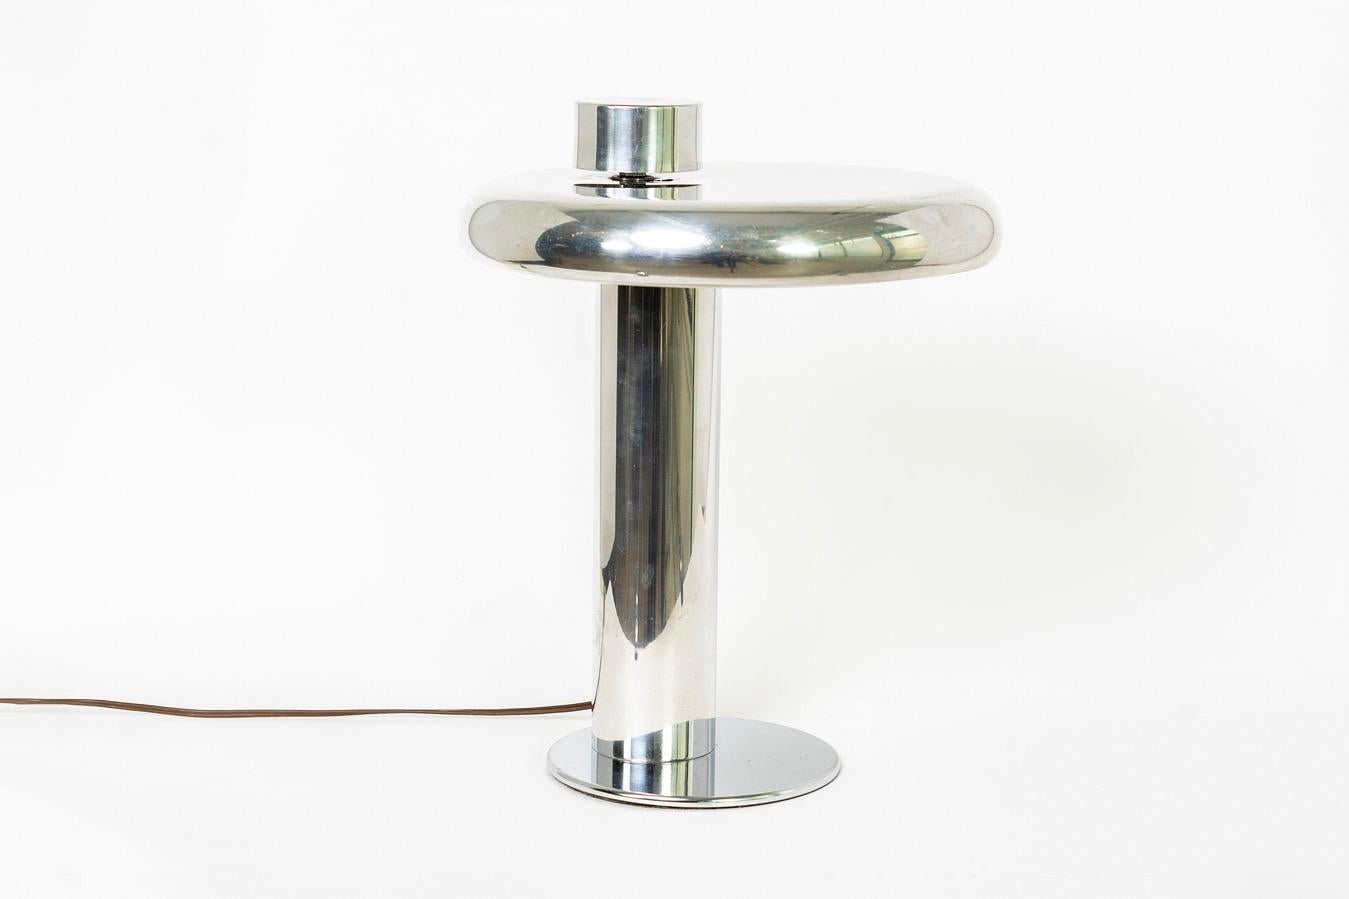 American Mid-Century Modernist Sonneman Attributed Polished Aluminum Table Lamp For Sale